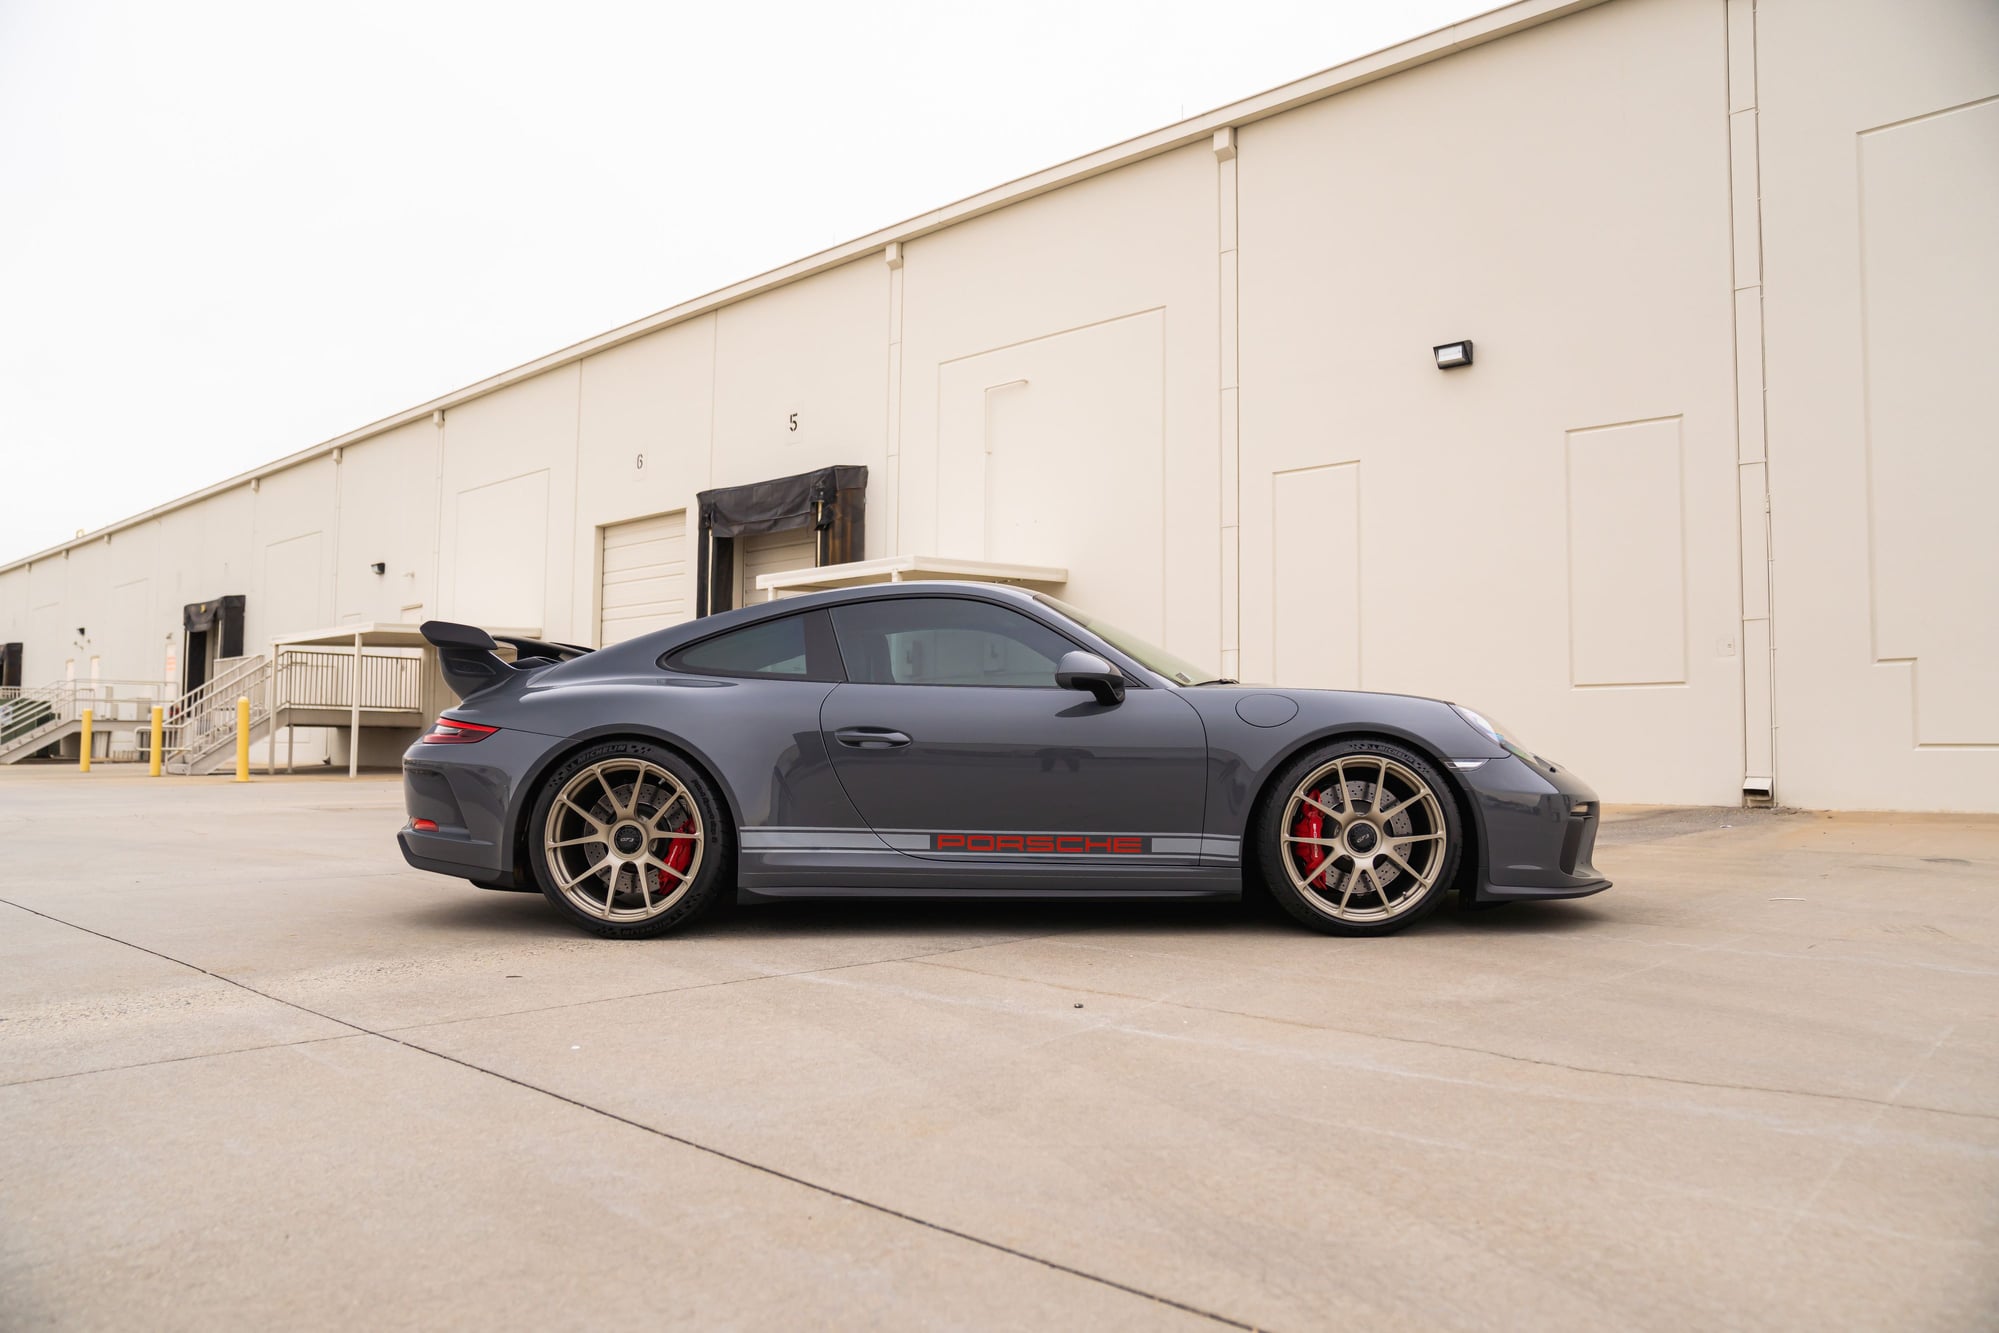 2018 Porsche GT3 - 2018 GT3 - Certified Pre-Owned and Loaded with PTS, CXX Options - Used - VIN WP0AC2A94JS176138 - 12,881 Miles - Automatic - Gray - Charlotte, NC 28211, United States